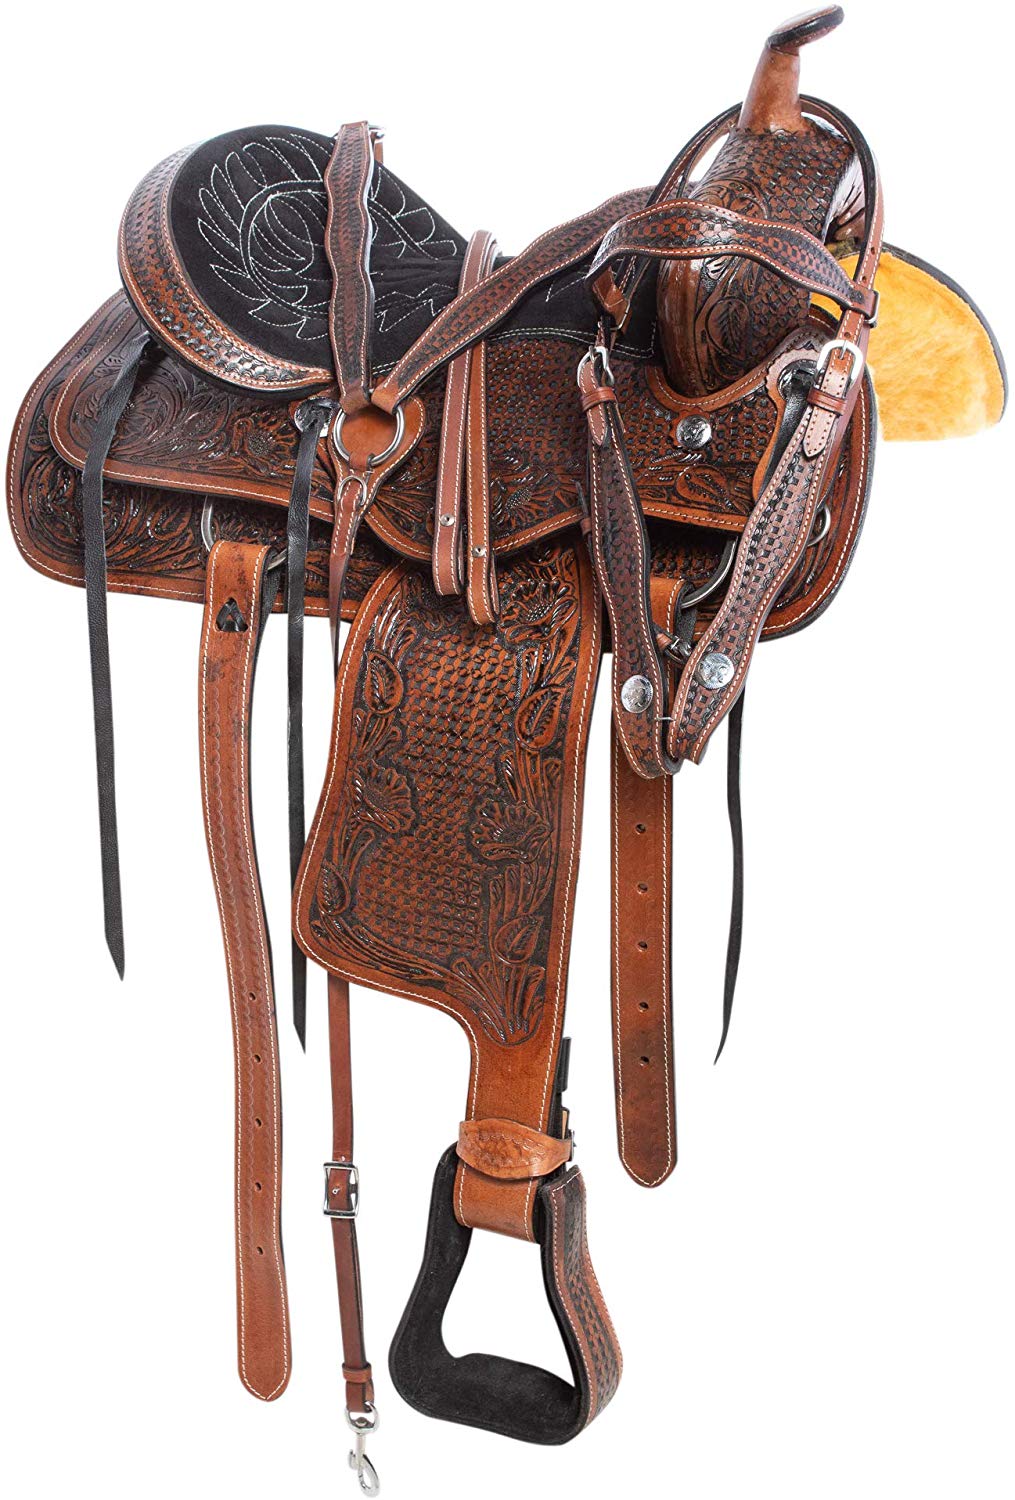 AceRugs-All-Natural-Cowhide-Western-Leather-Horse-Saddle